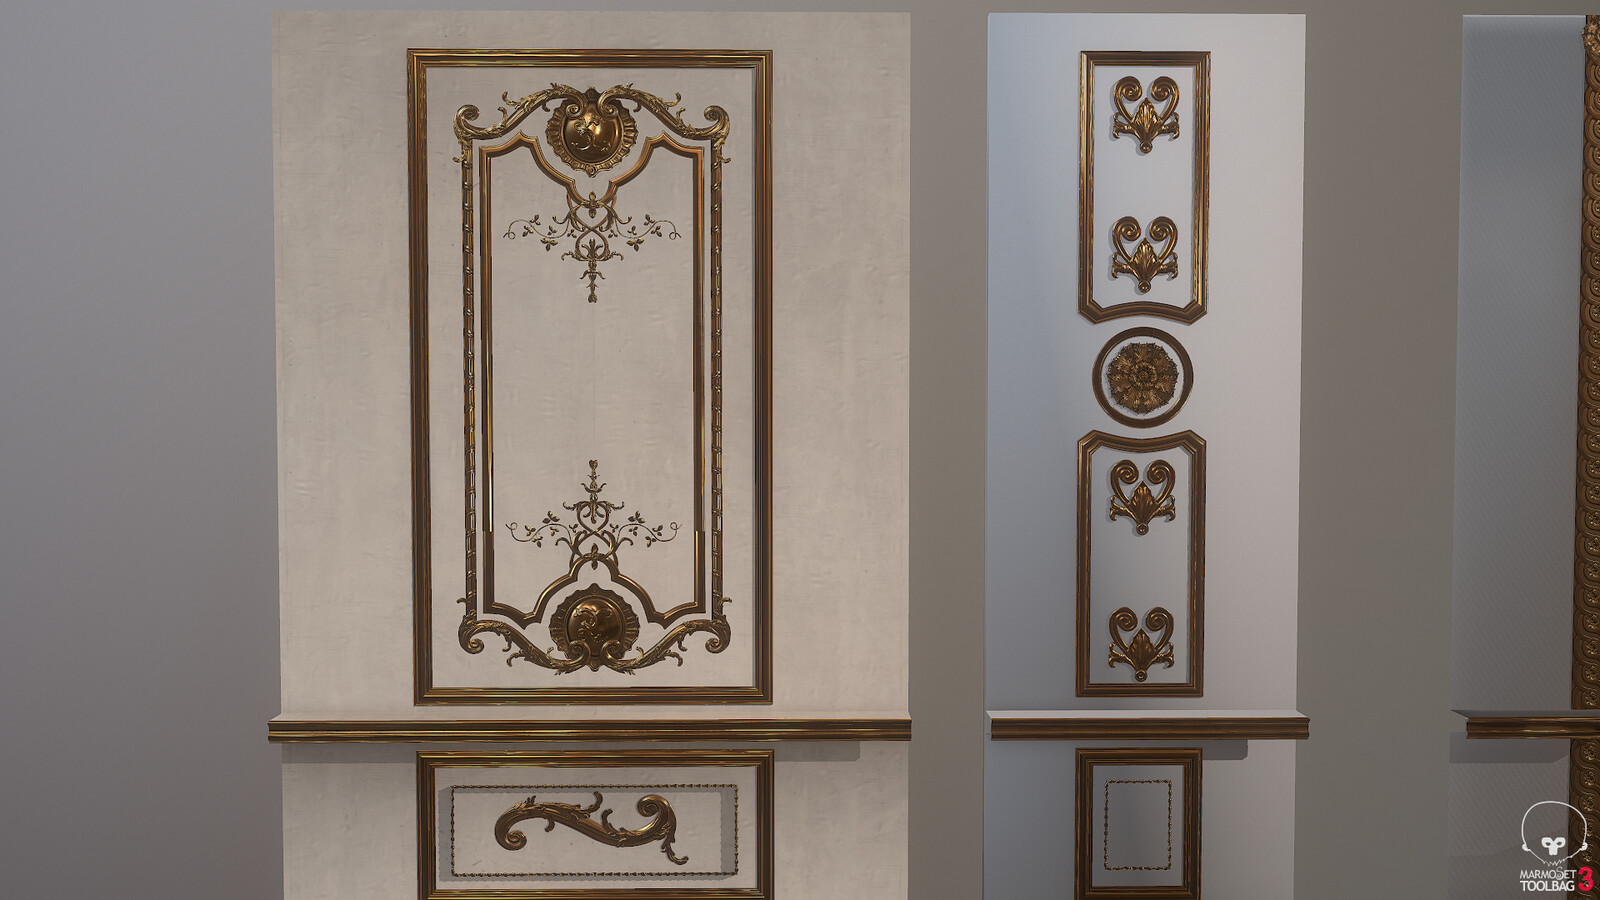 Modular wall pieces: Ornaments were sculpted in ZBrush and baked down to planes.